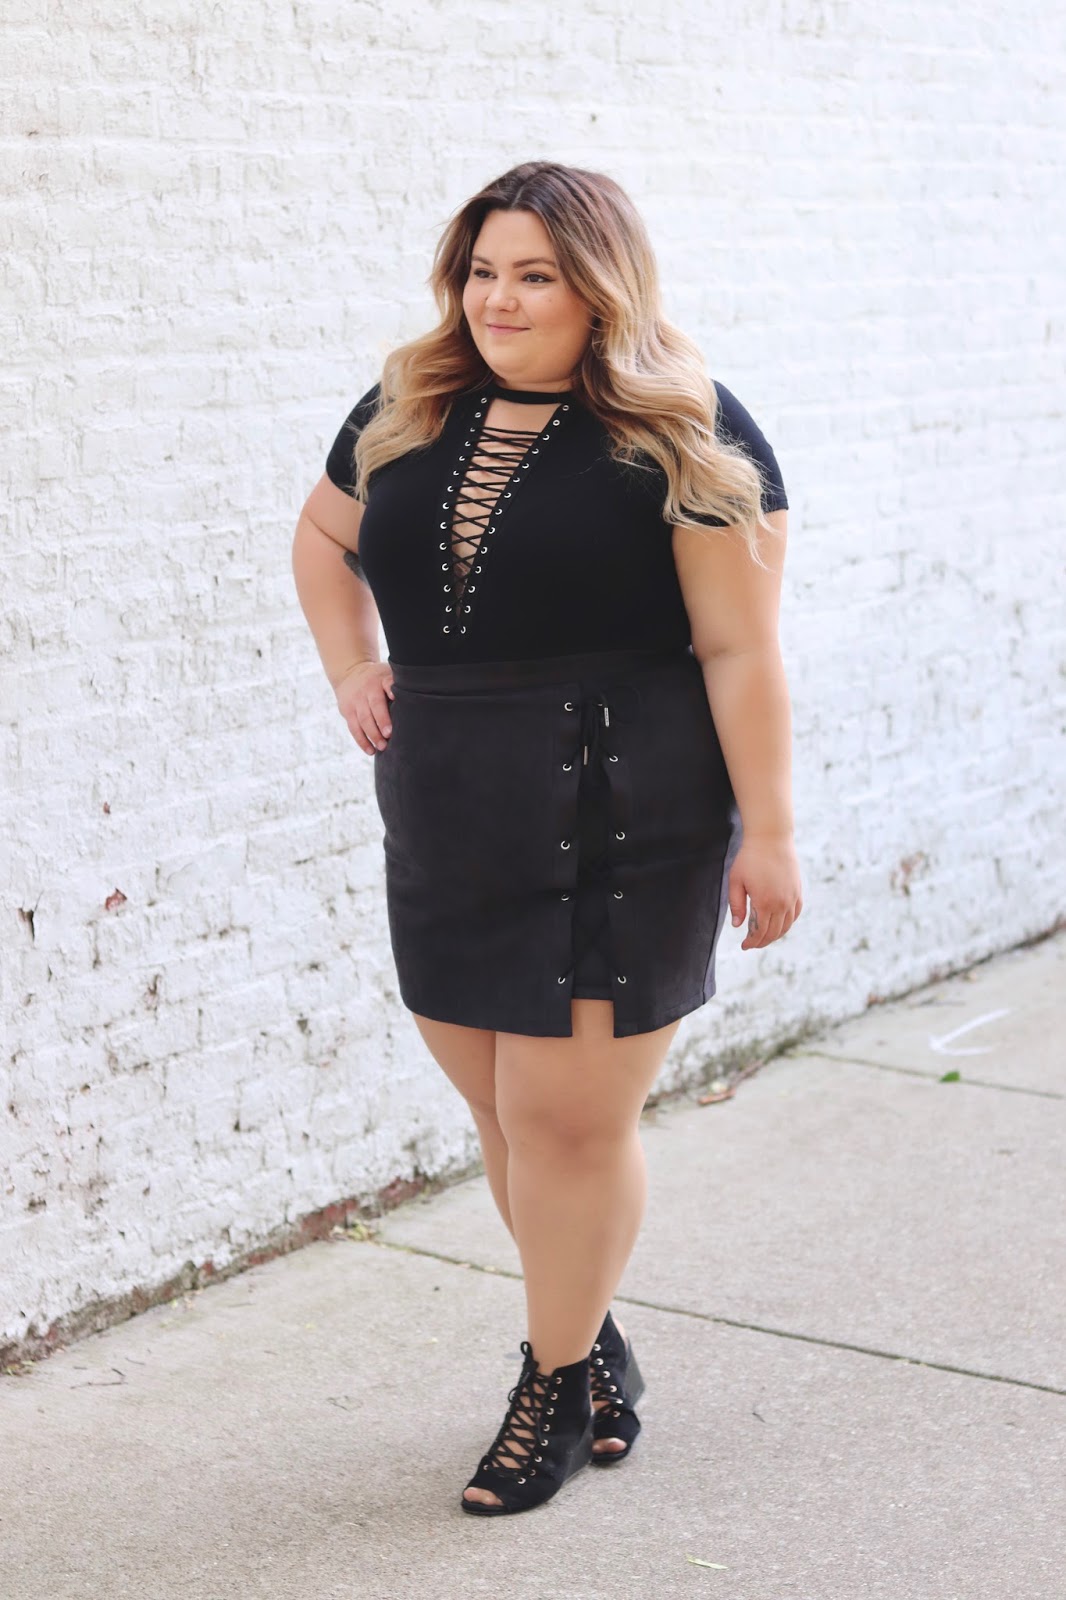 natalie craig, natalie in the city, Chicago plus size fashion blogger, midwest blogger, influencer, fashion nova curve, plus size suede skirts, affordable plus size fashion, plus size, fatshion, curves and confidence, lace up, bombshell look, a night out